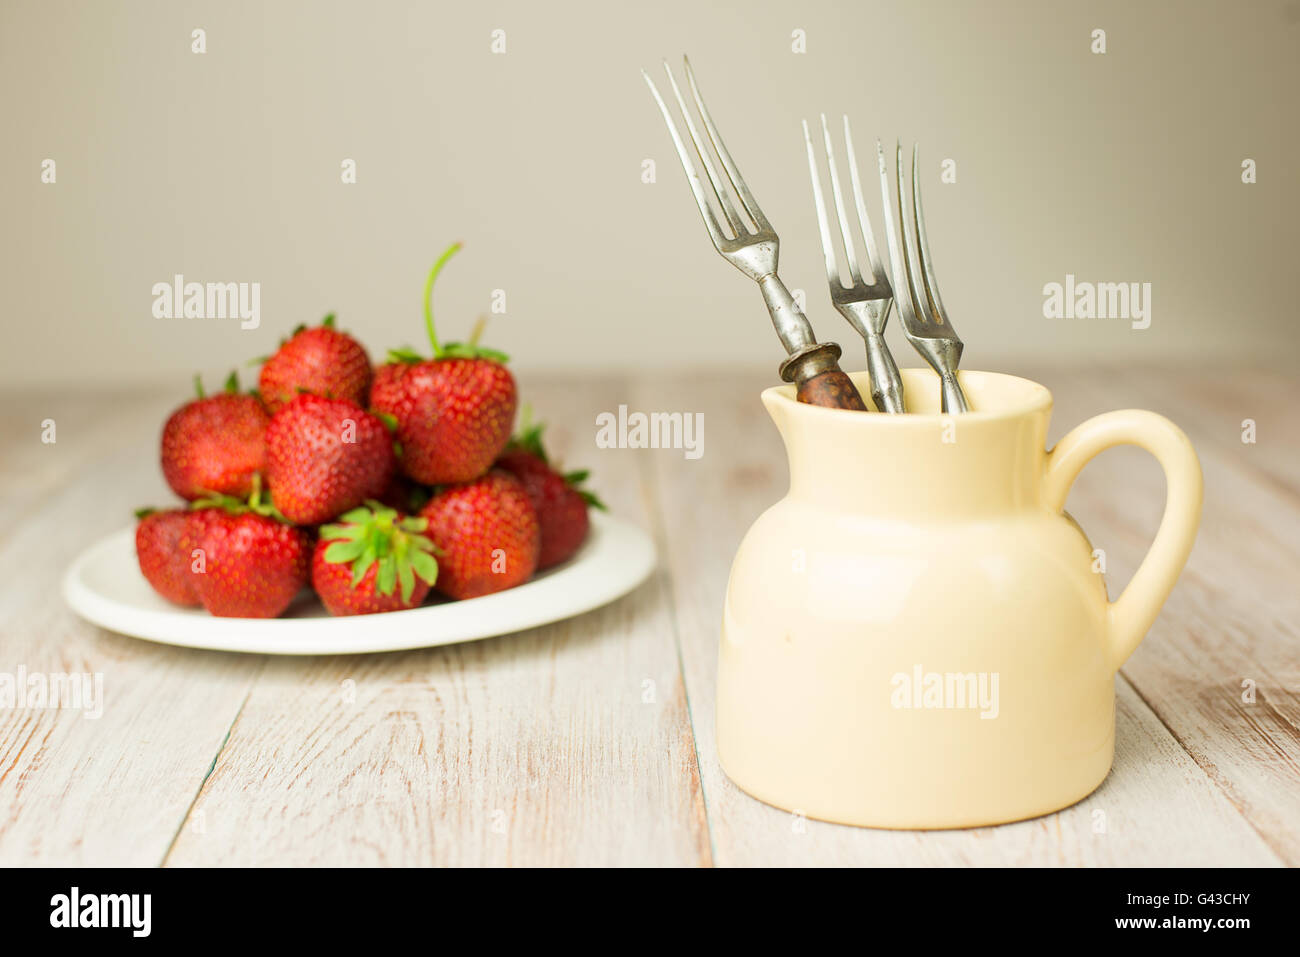 Three forks and ripe red strawberries on a white plate Stock Photo